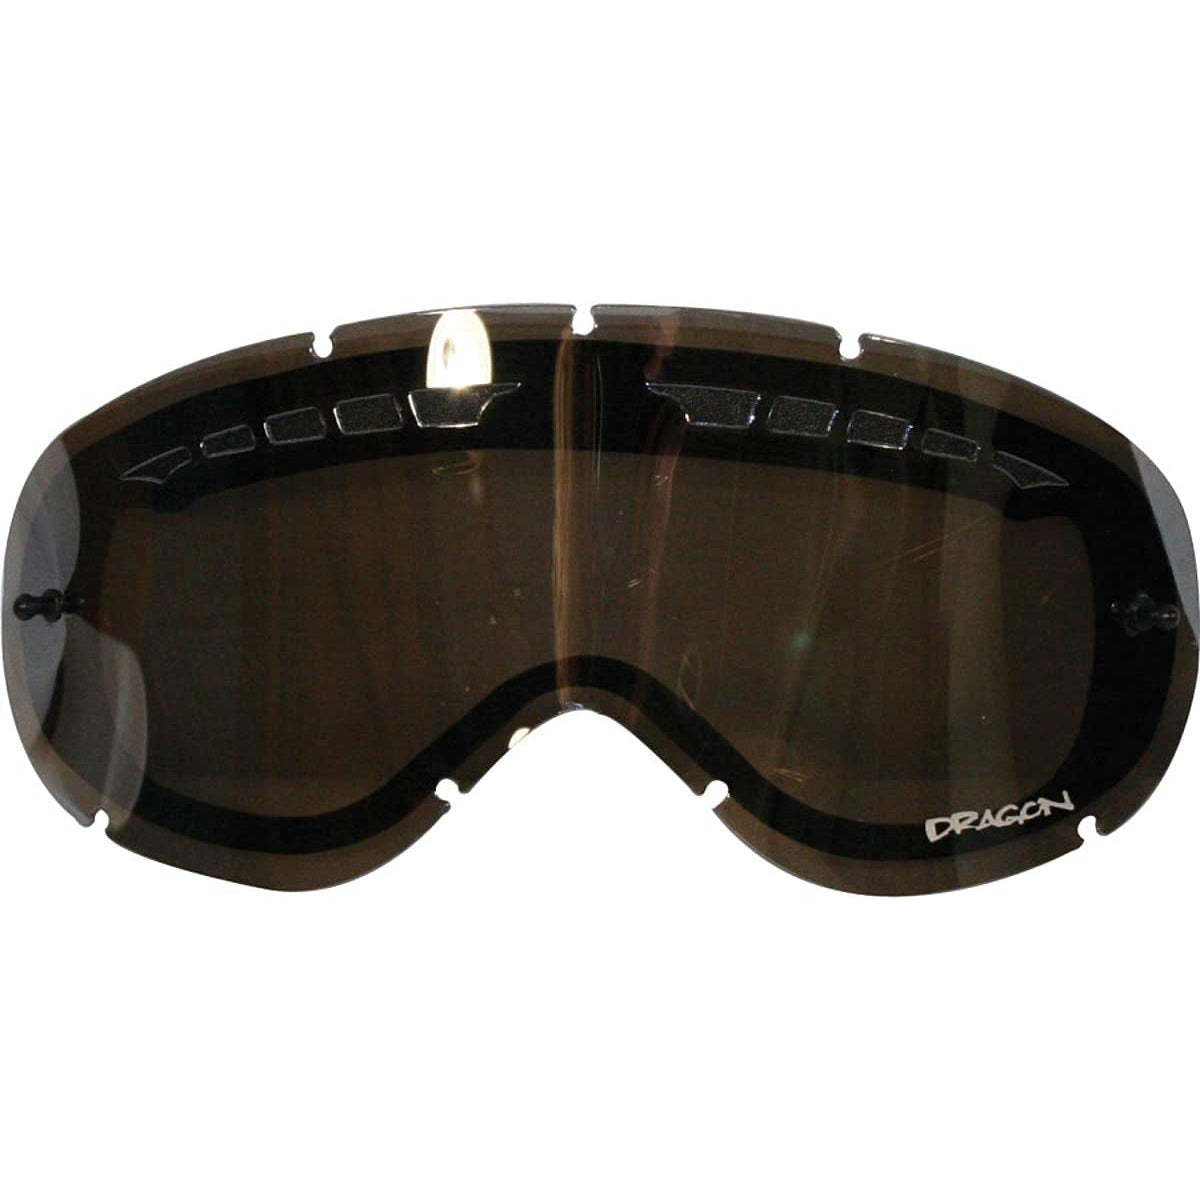 Dragon Alliance MDX All Weather Replacemet Lens Goggle Accessories-722-1268